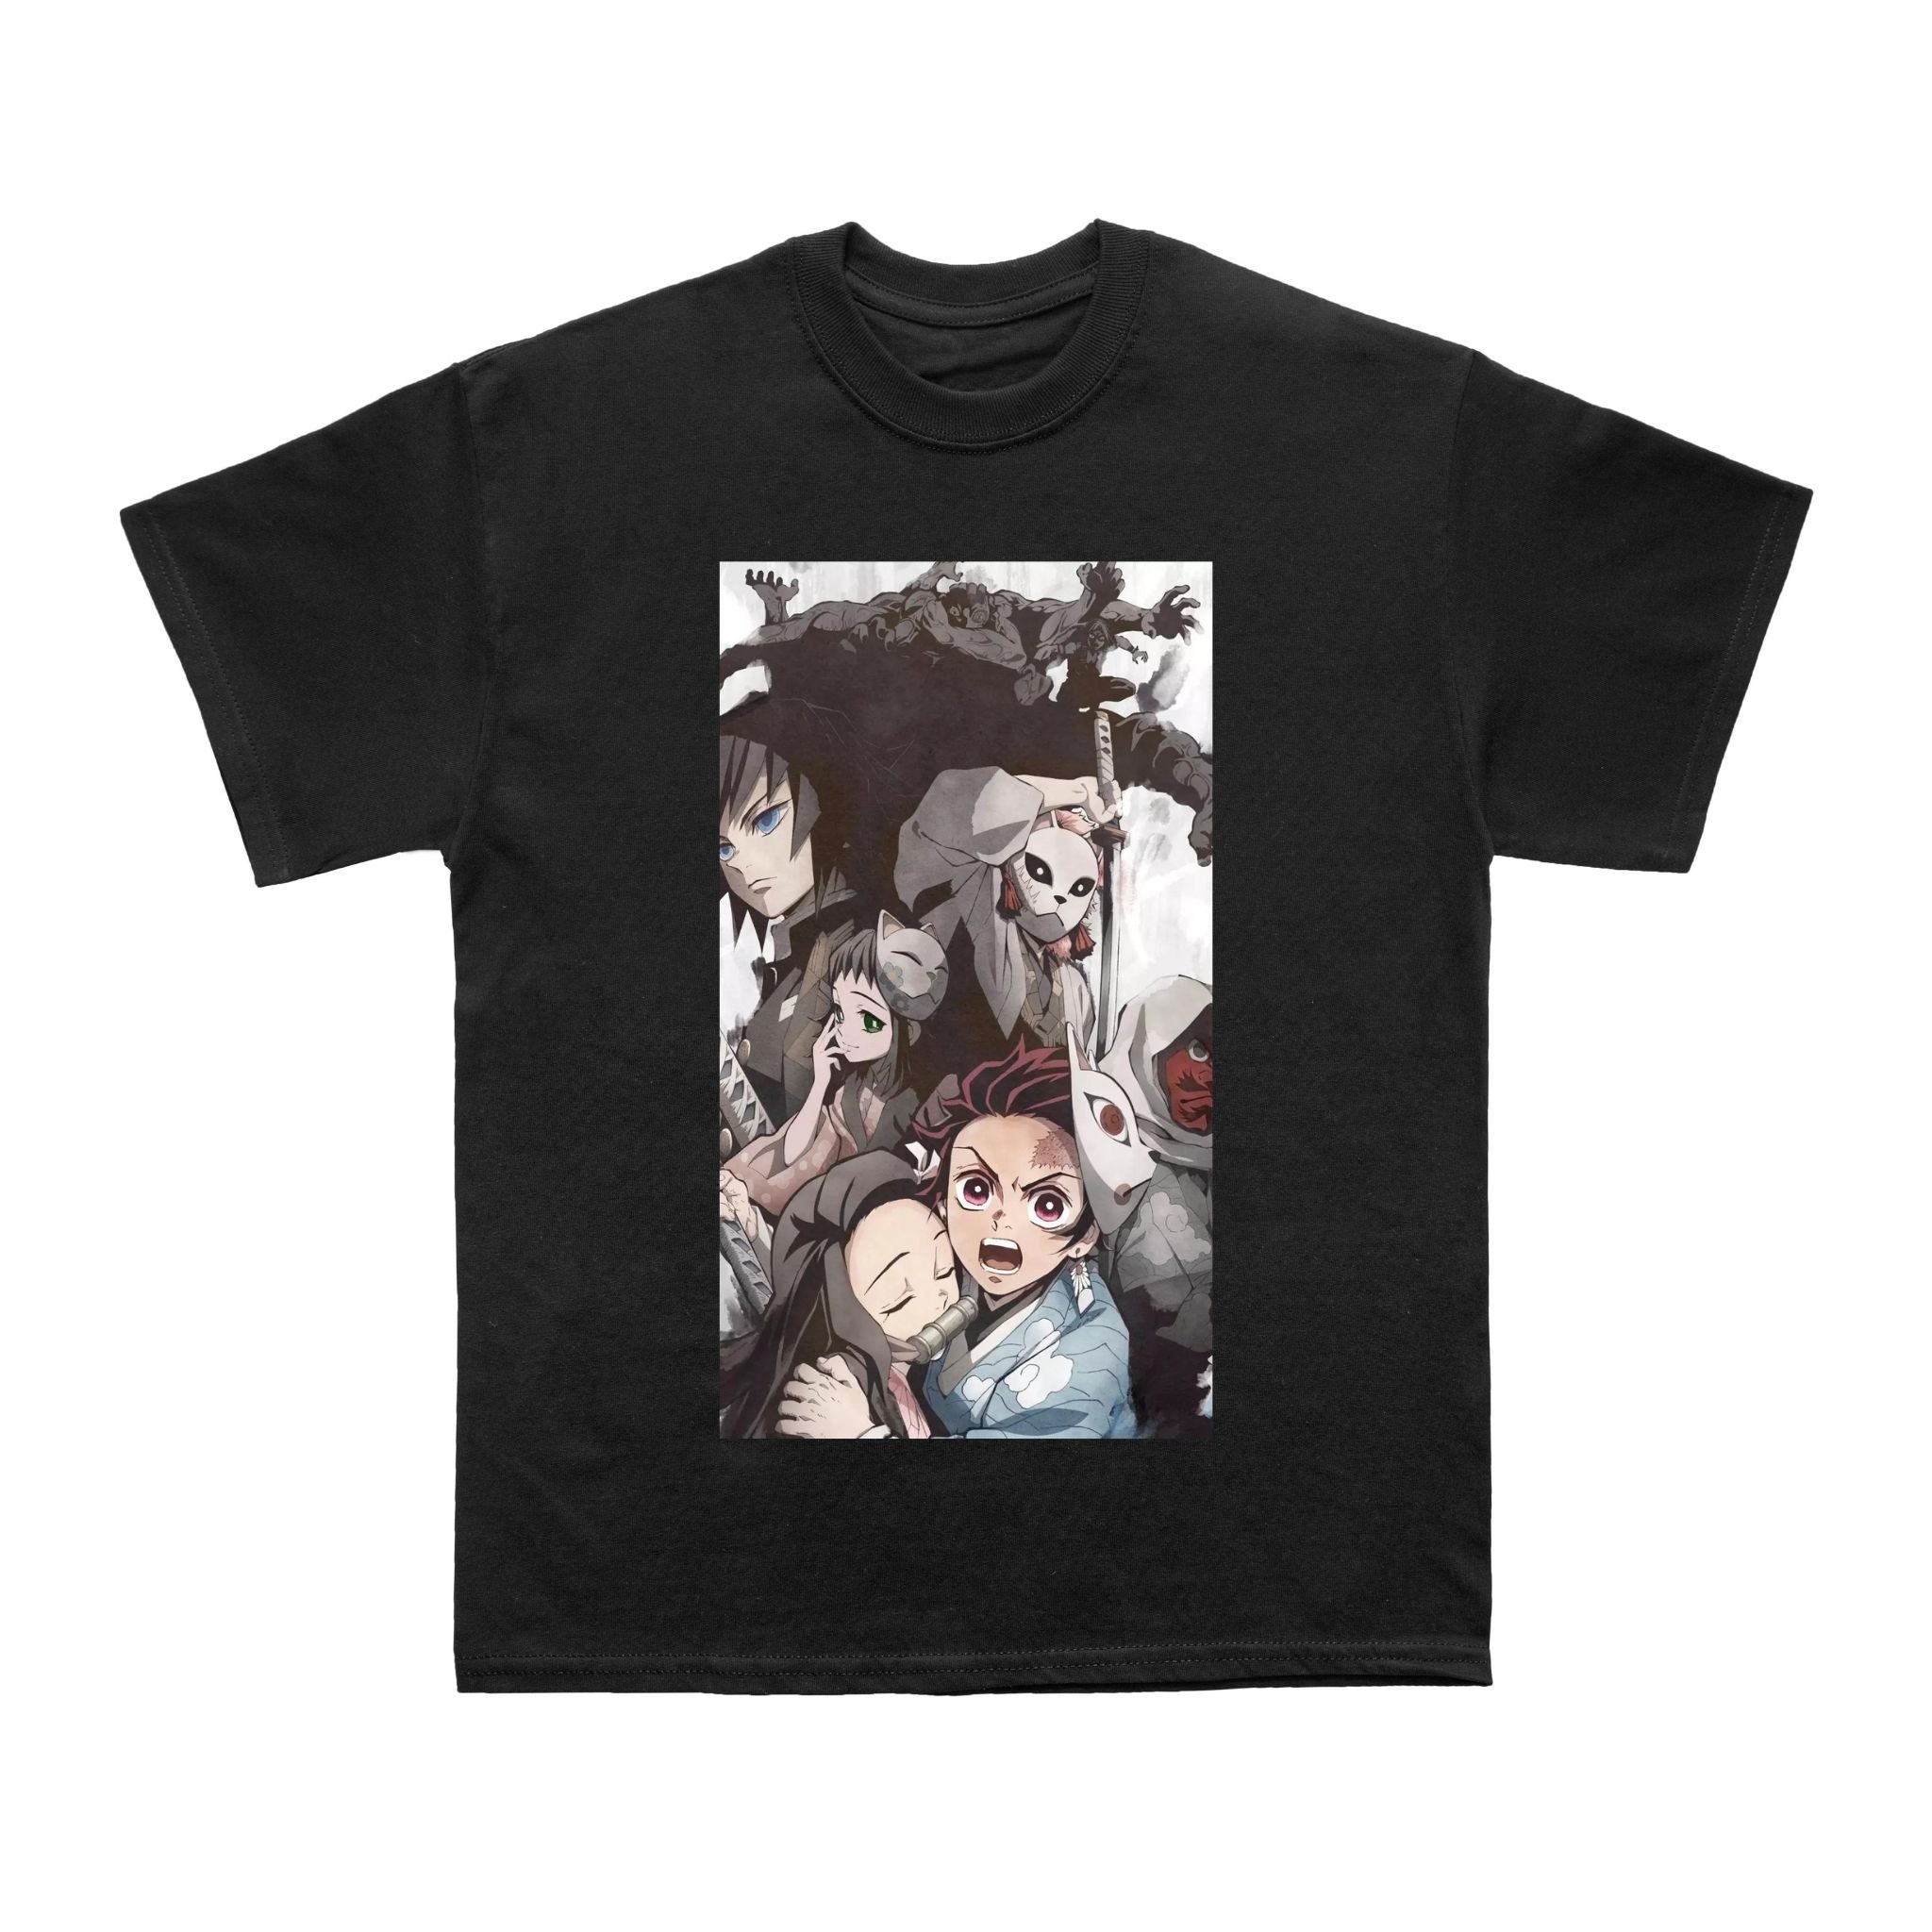 Chines Anime Inspired T shirt